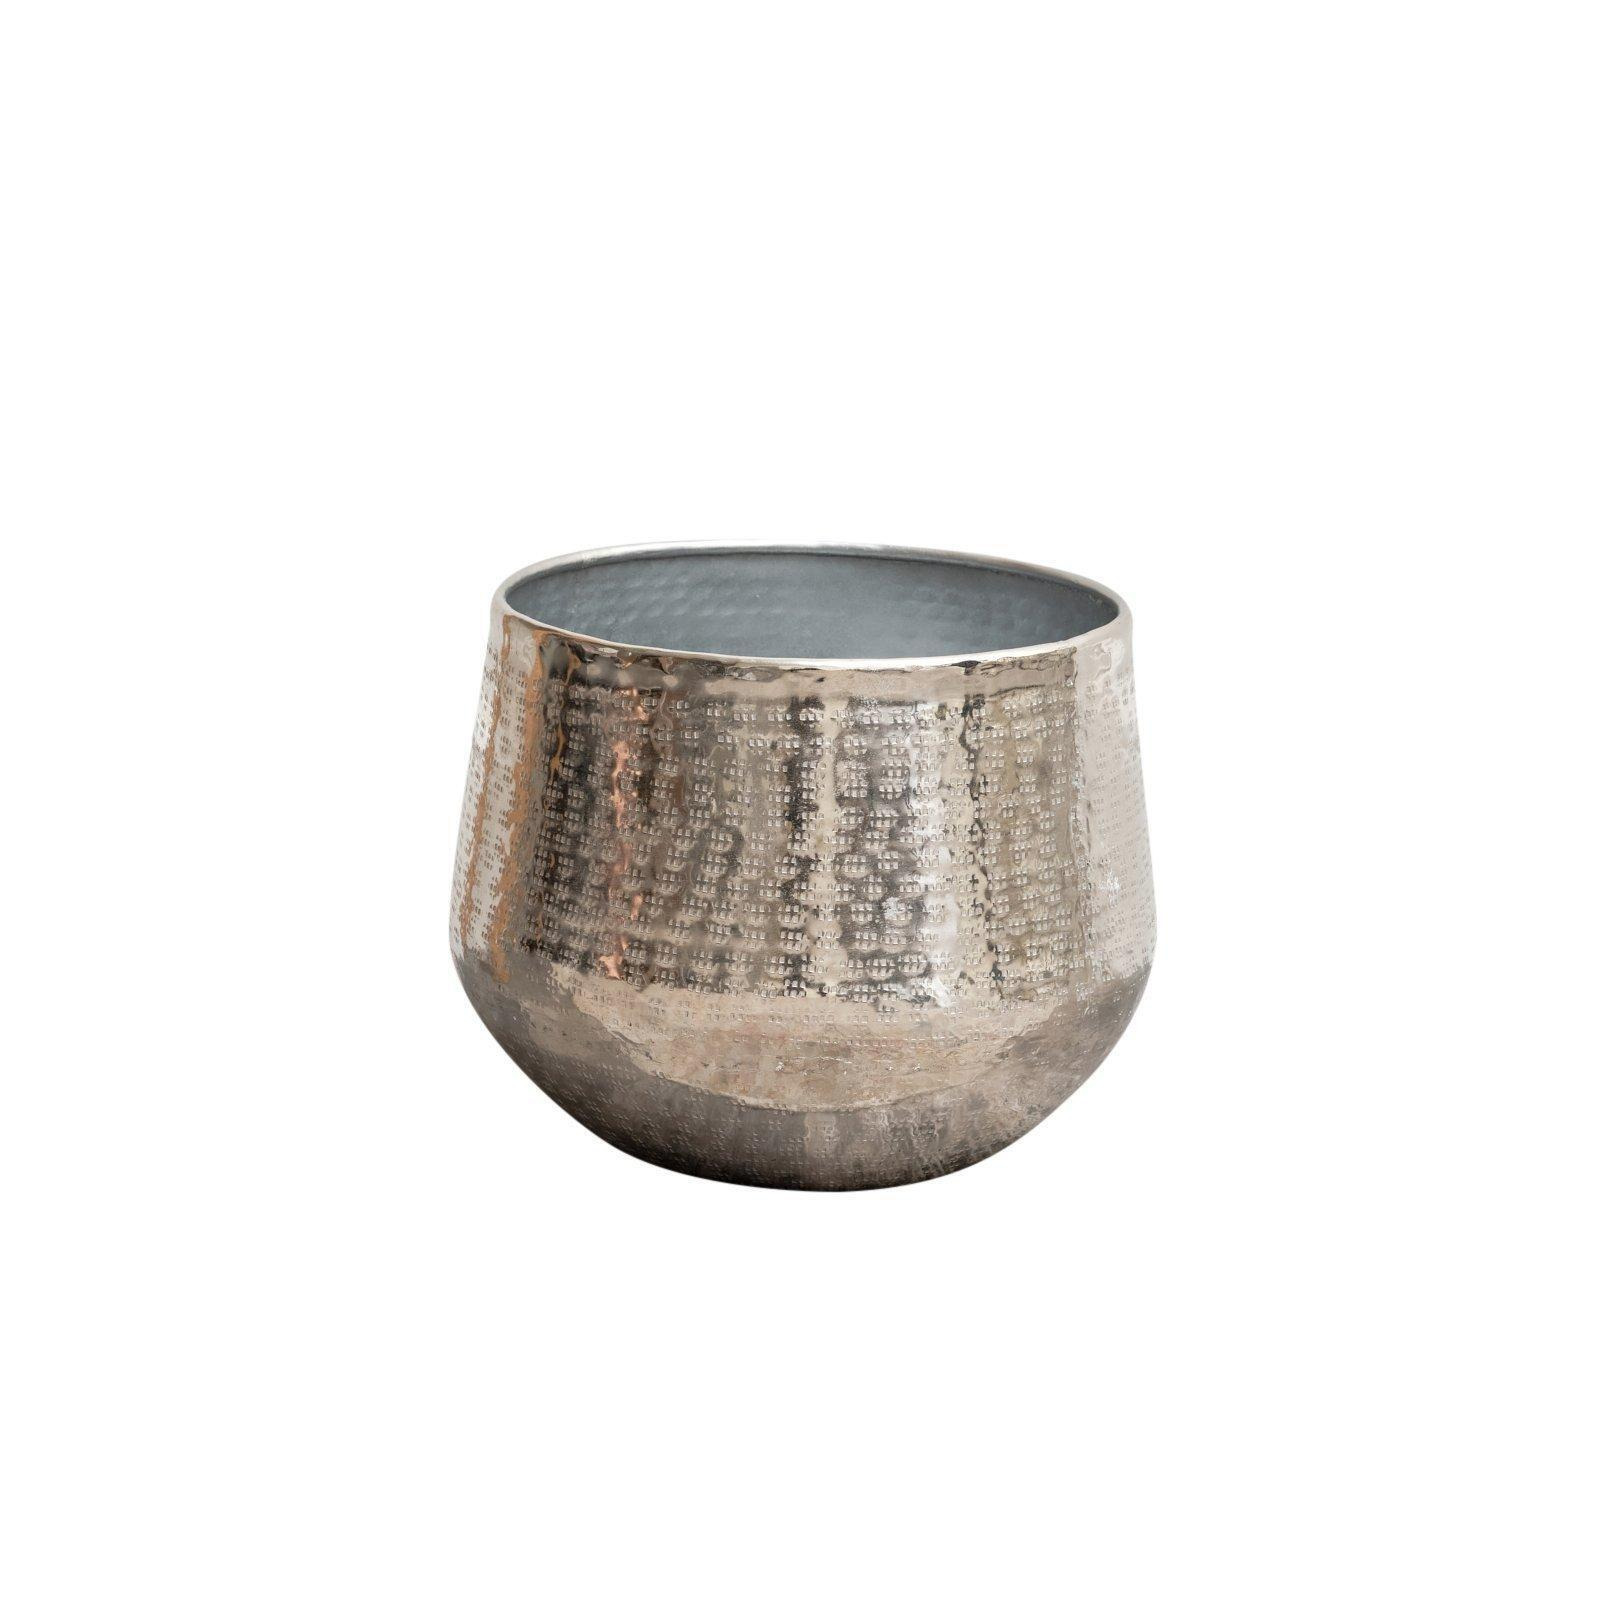 Large Round Silver Patterned Planter - image 1